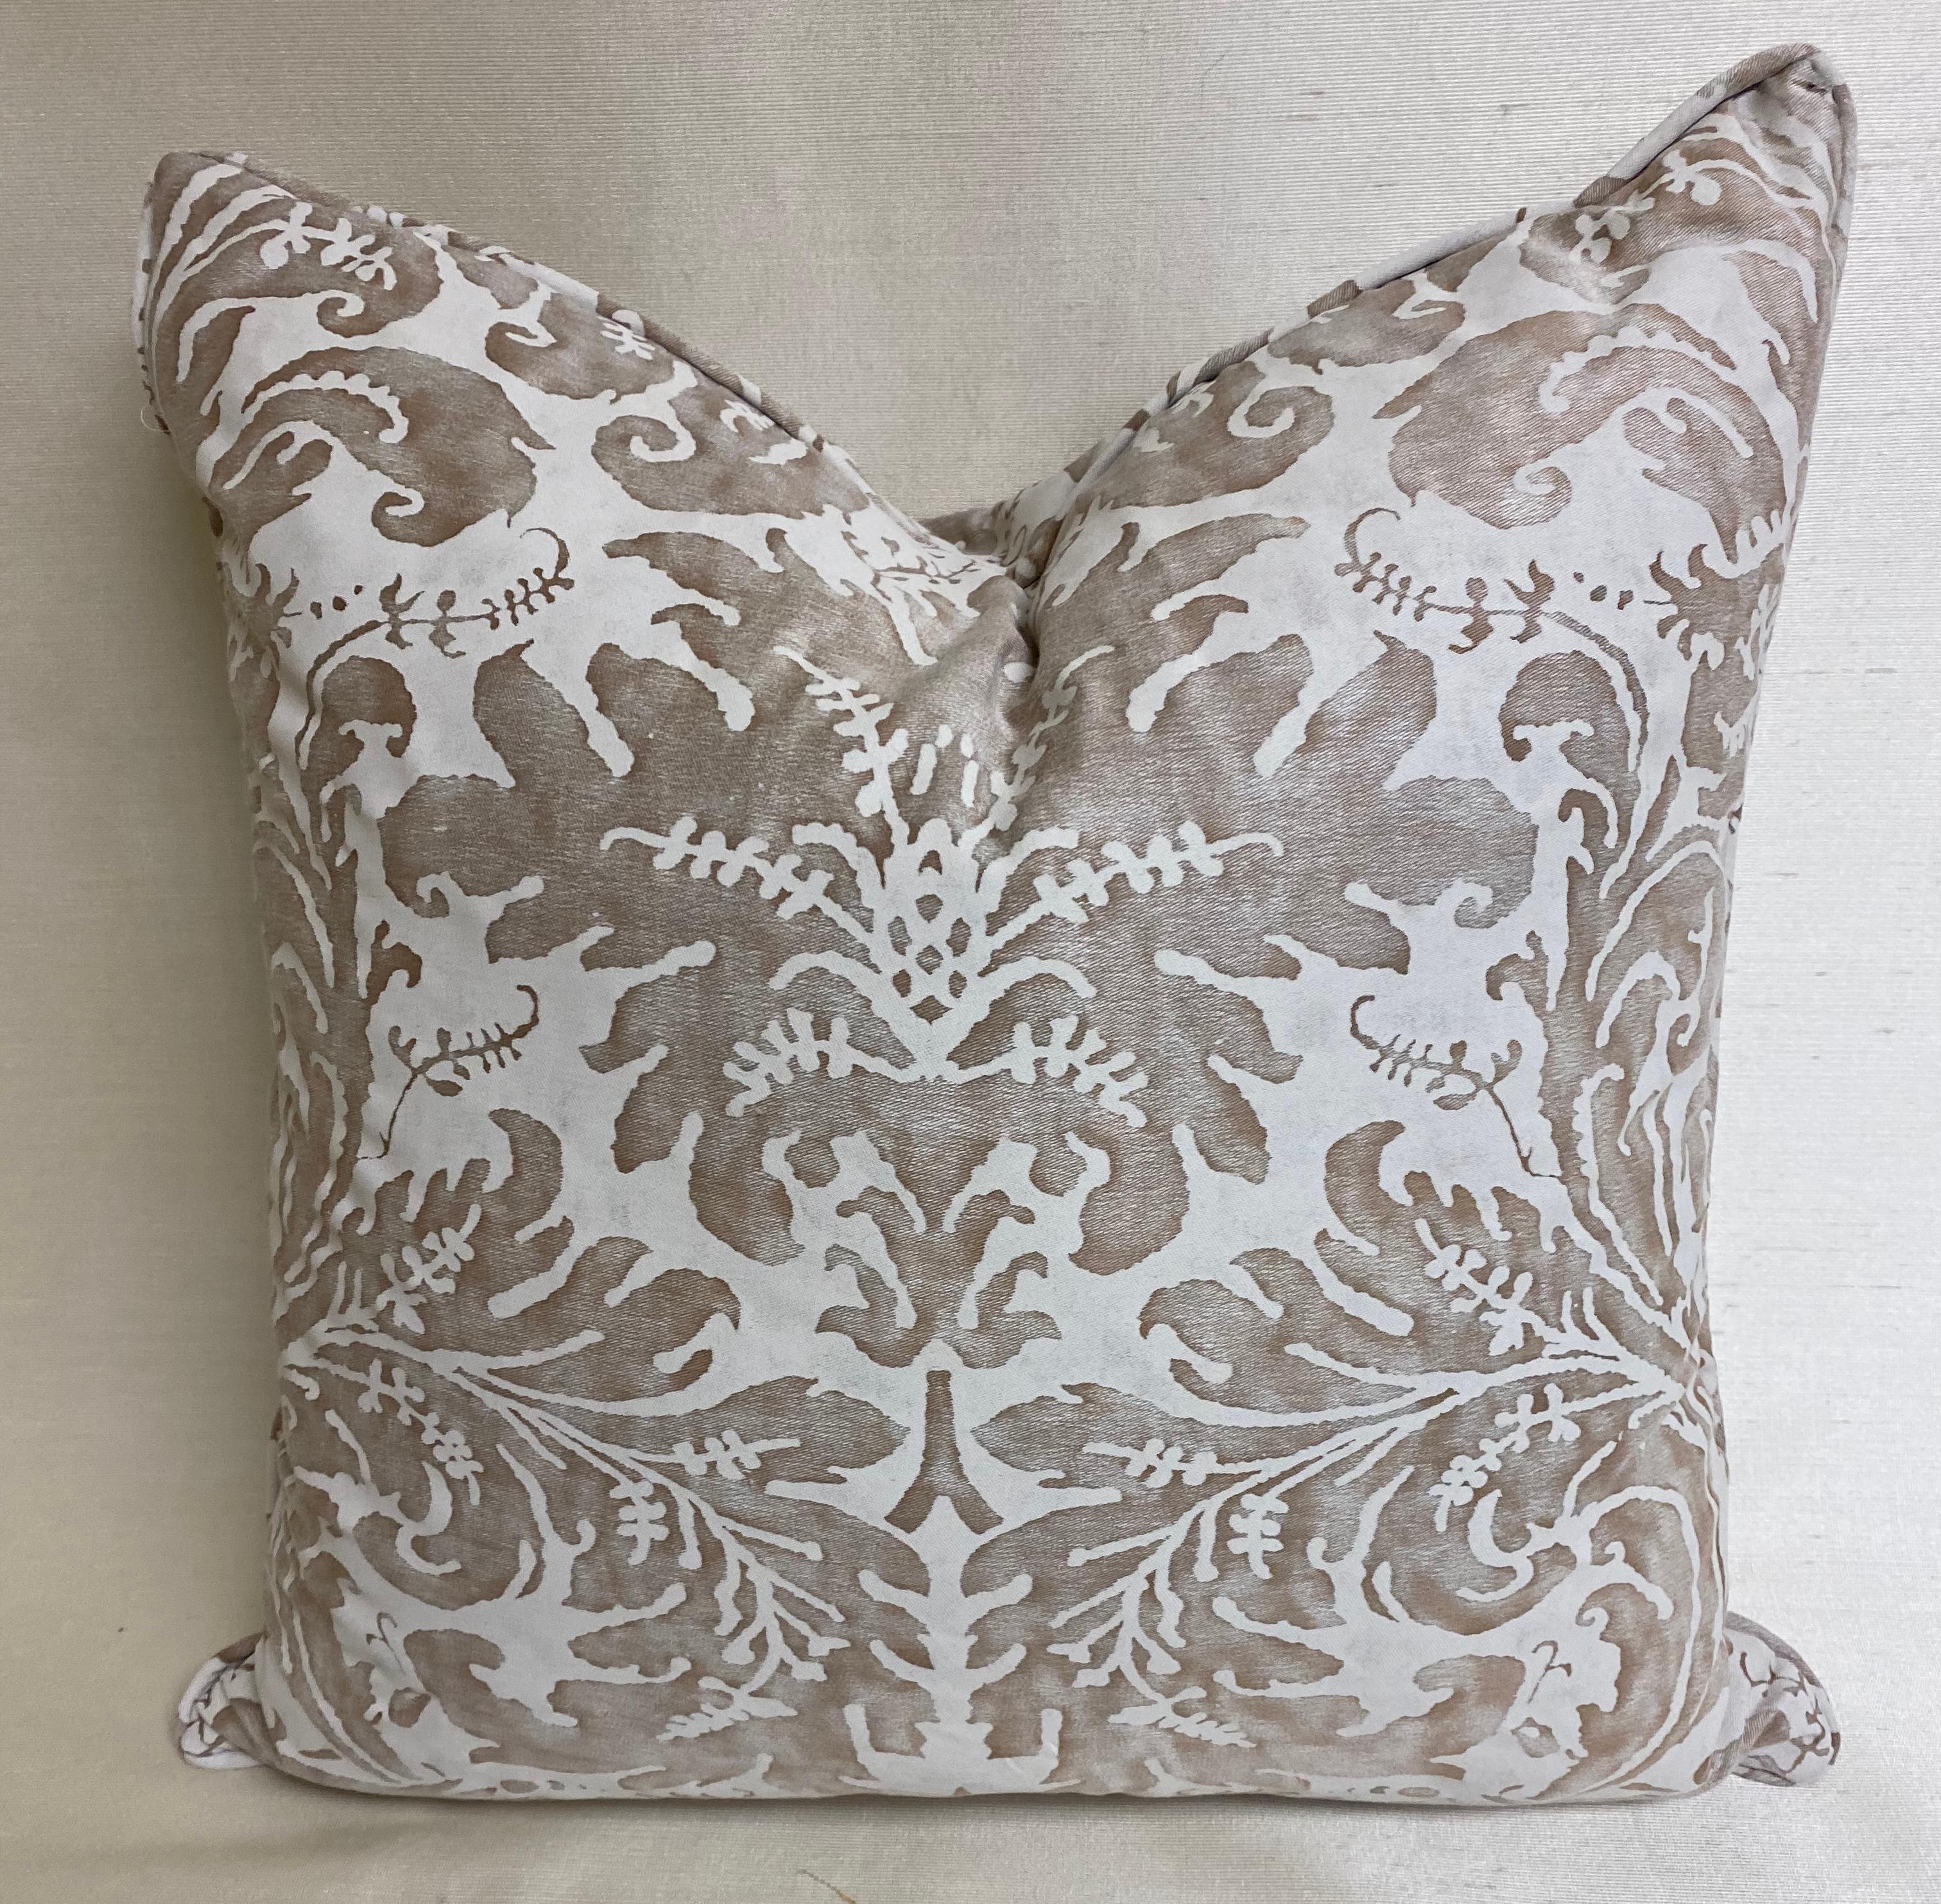 Decorative pair of down-filled Fortuny silvery-taupe and white cushions.
